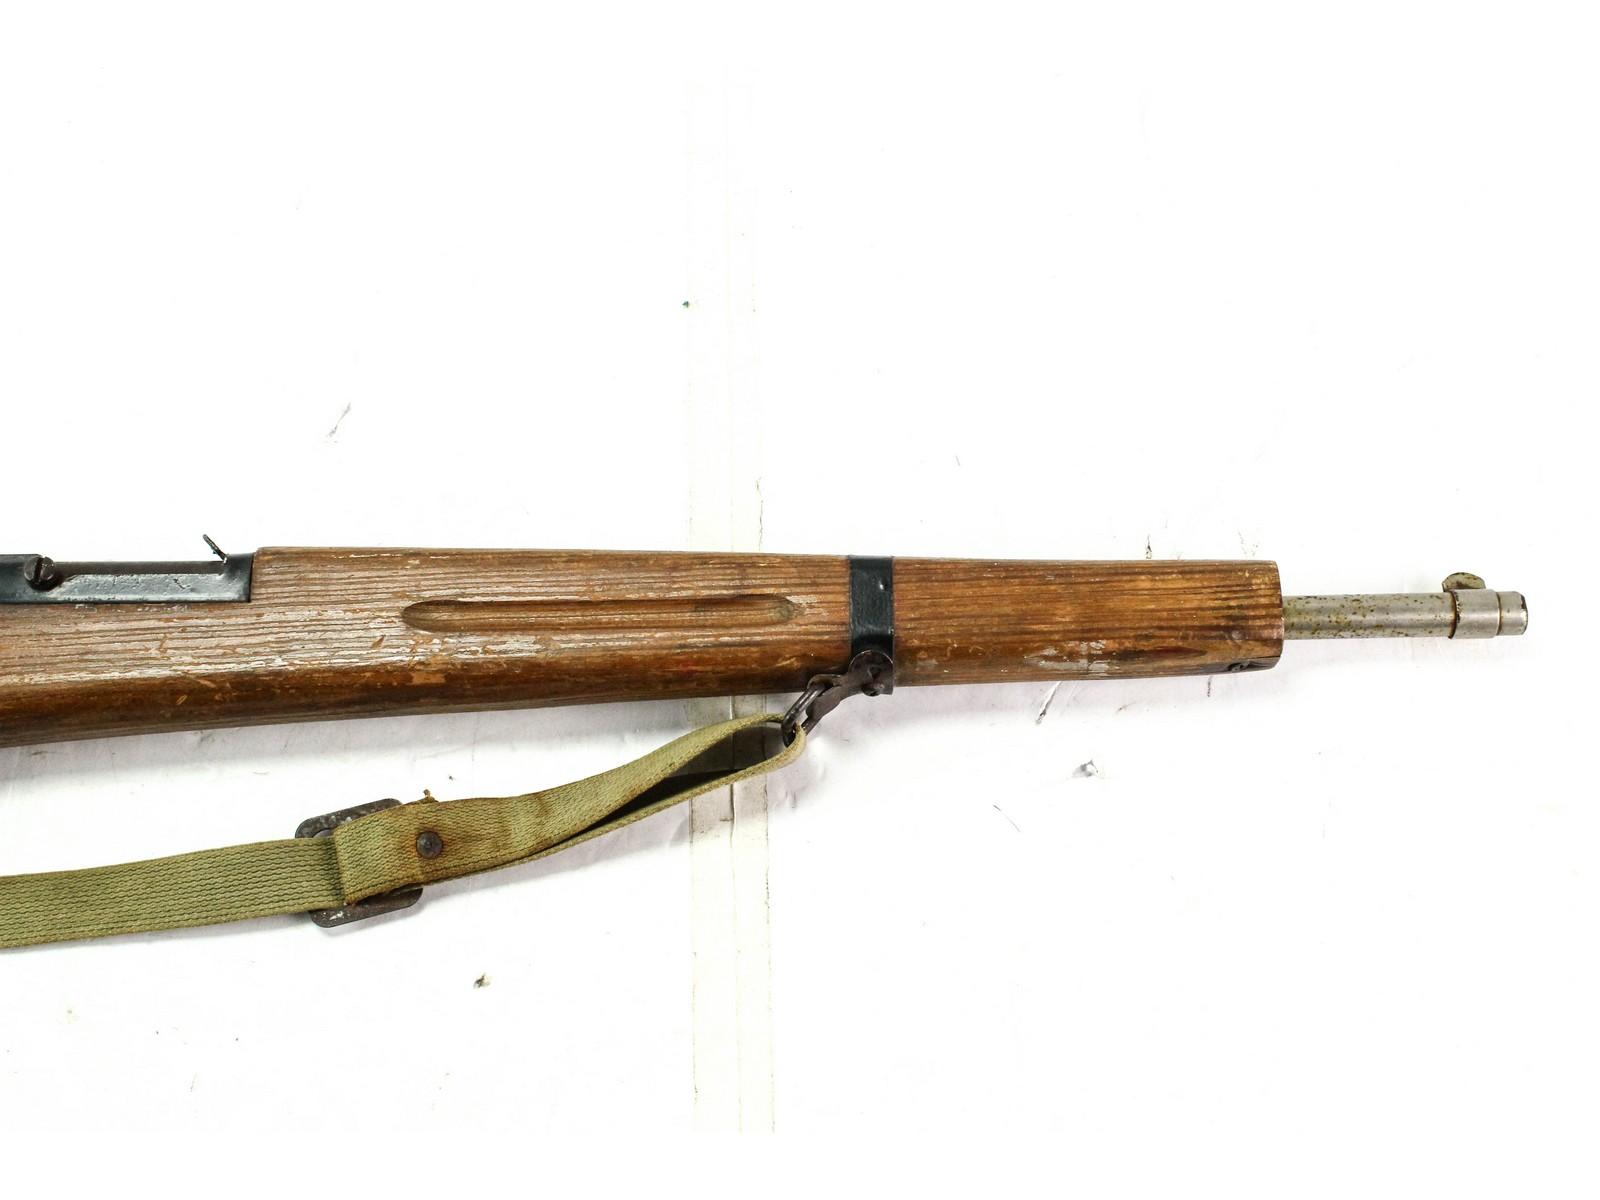 Vintage WWII Toy Rifle